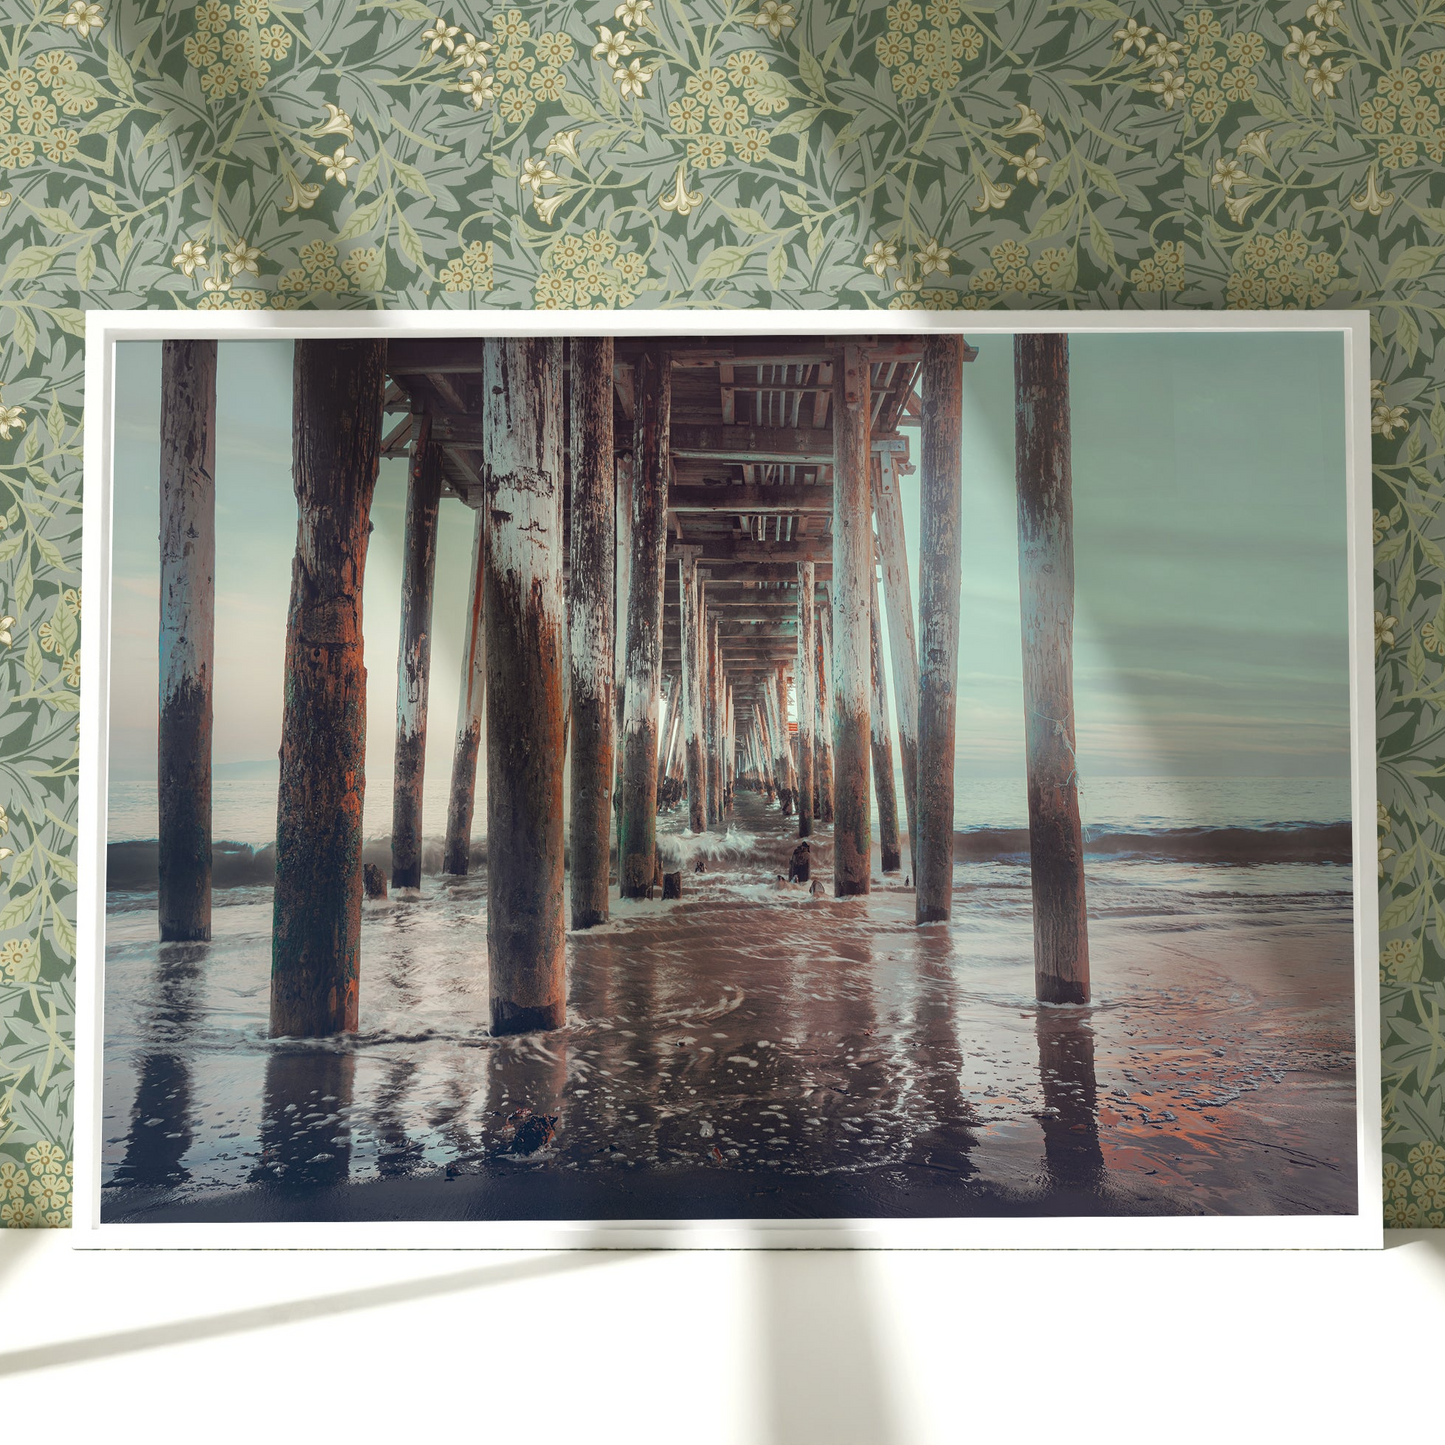 a picture of a pier in the water